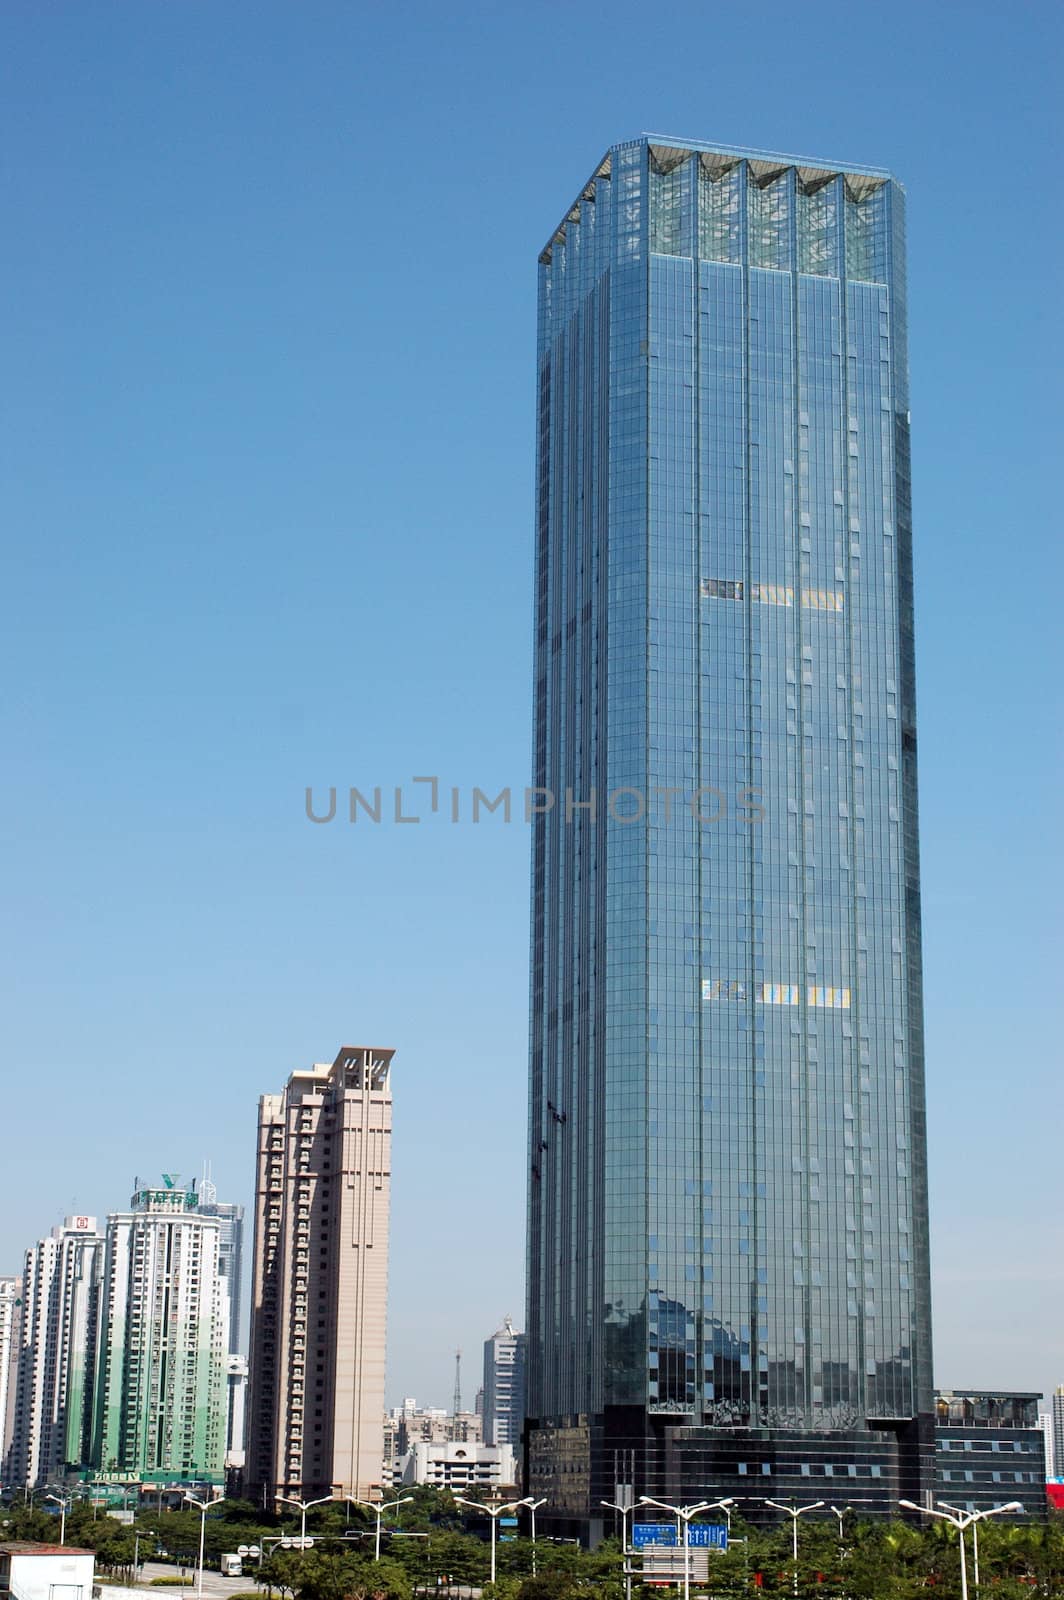 Chinese skyscrapers by bartekchiny